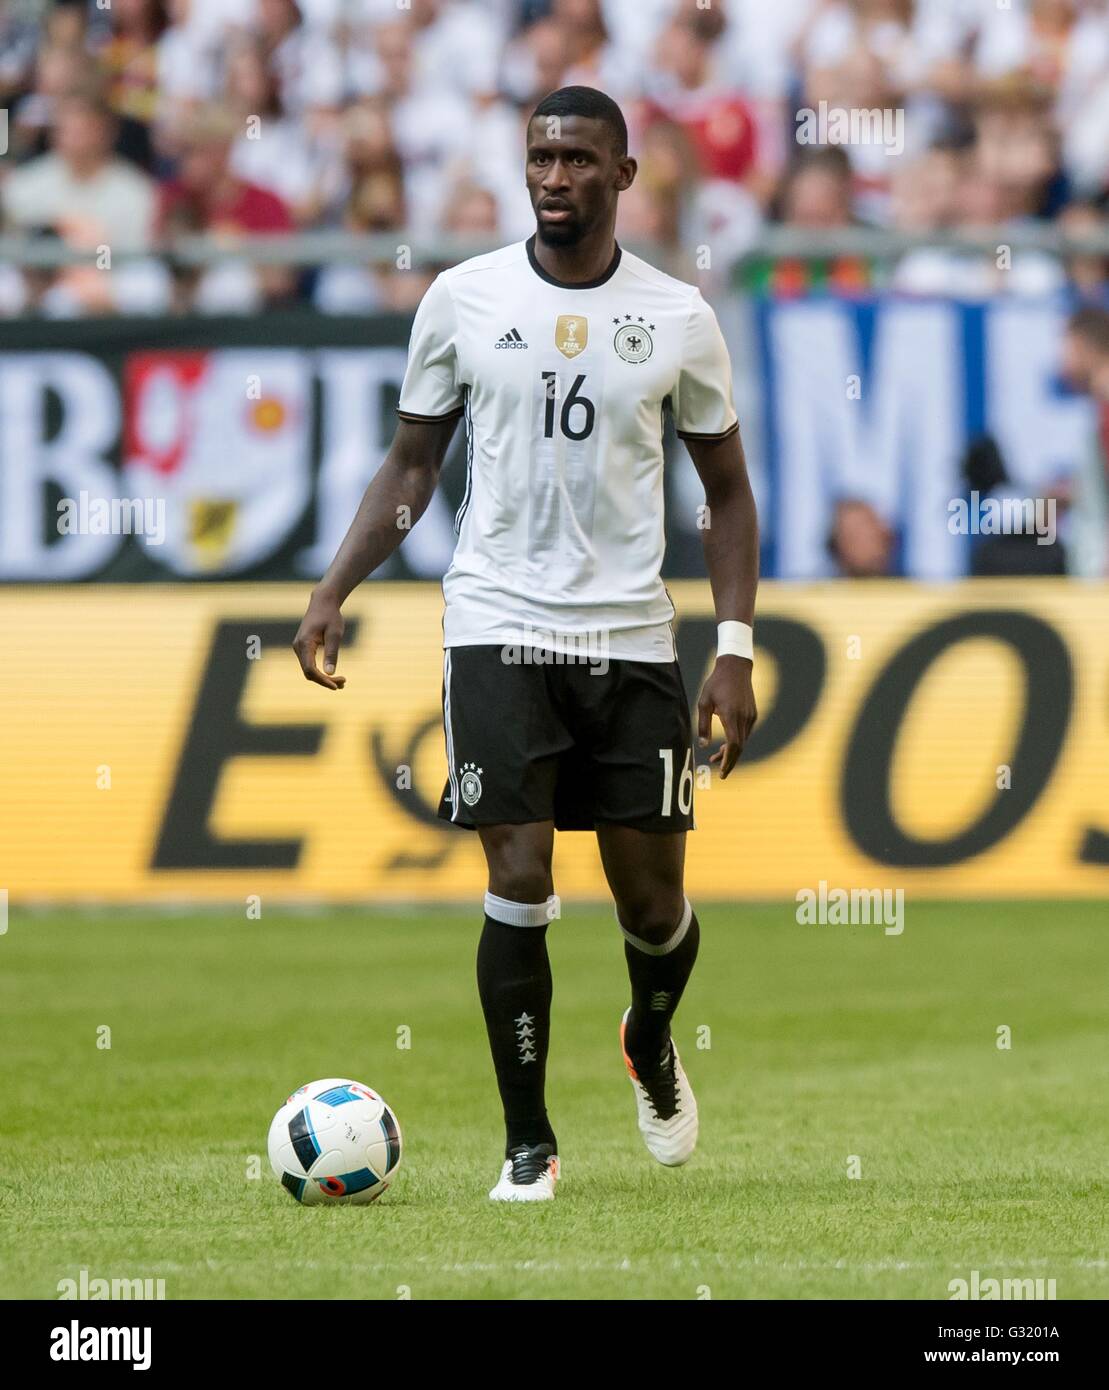 Gelsenkirch, Germany. 4th June, 2016. Germany's Antonio Ruediger in action during the soccer friendly German vs Hungary in Gelsenkirch, Germany, 4 June 2016. Photo: Thomas Eisenhuth/dpa - NO WIRE SERVICE -/dpa/Alamy Live News Stock Photo